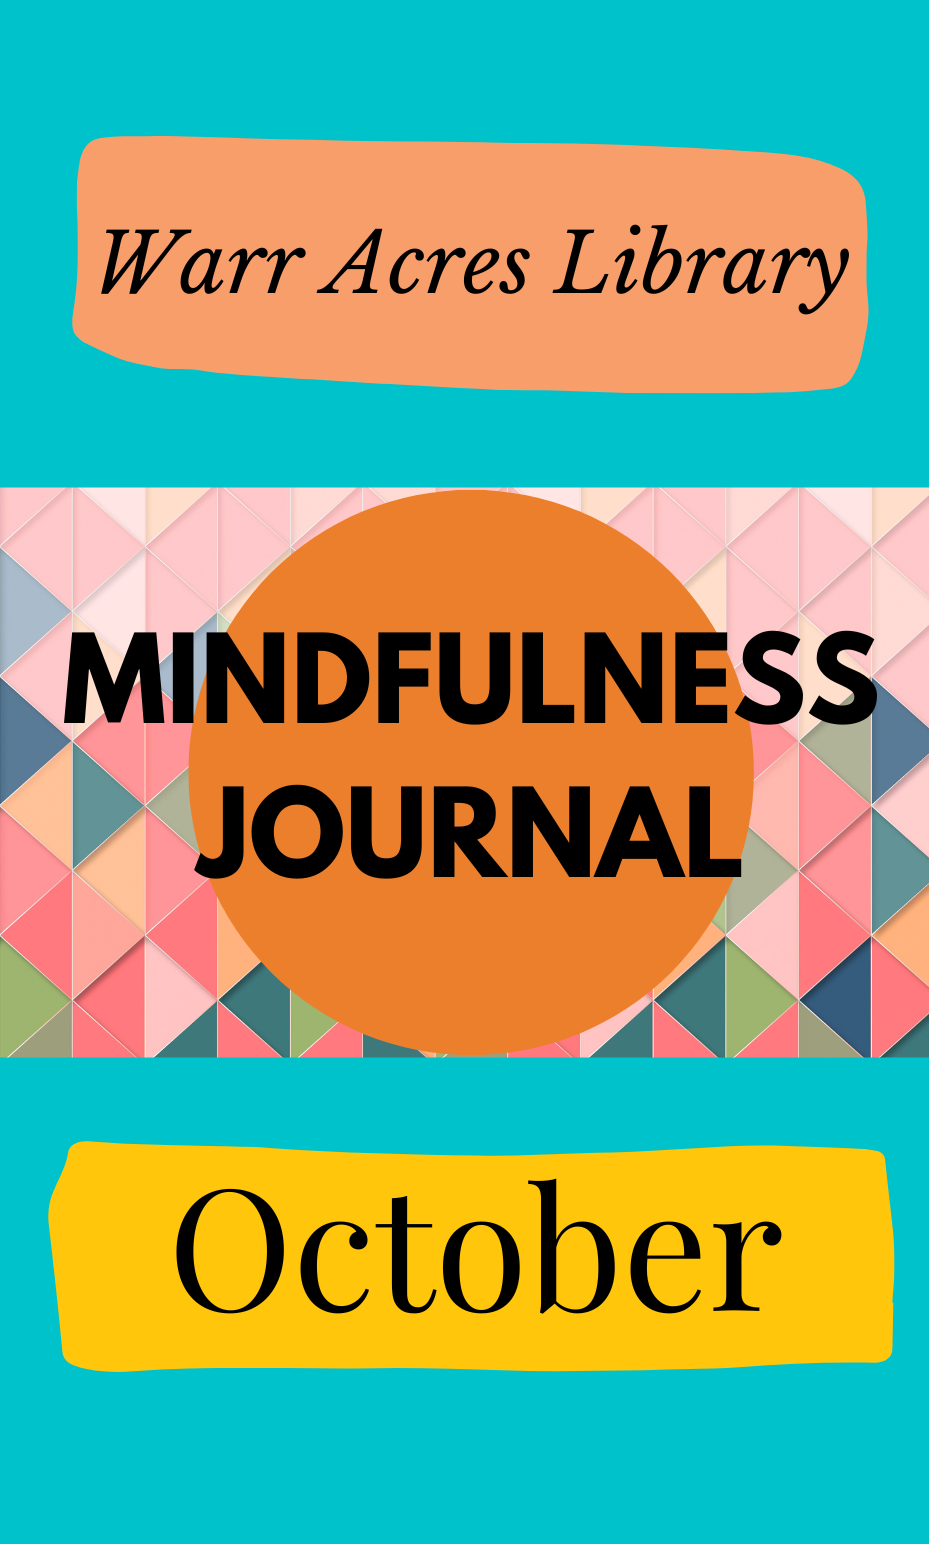 A colorful cover that says, "Warr Acres Library Mindfulness Journal October."